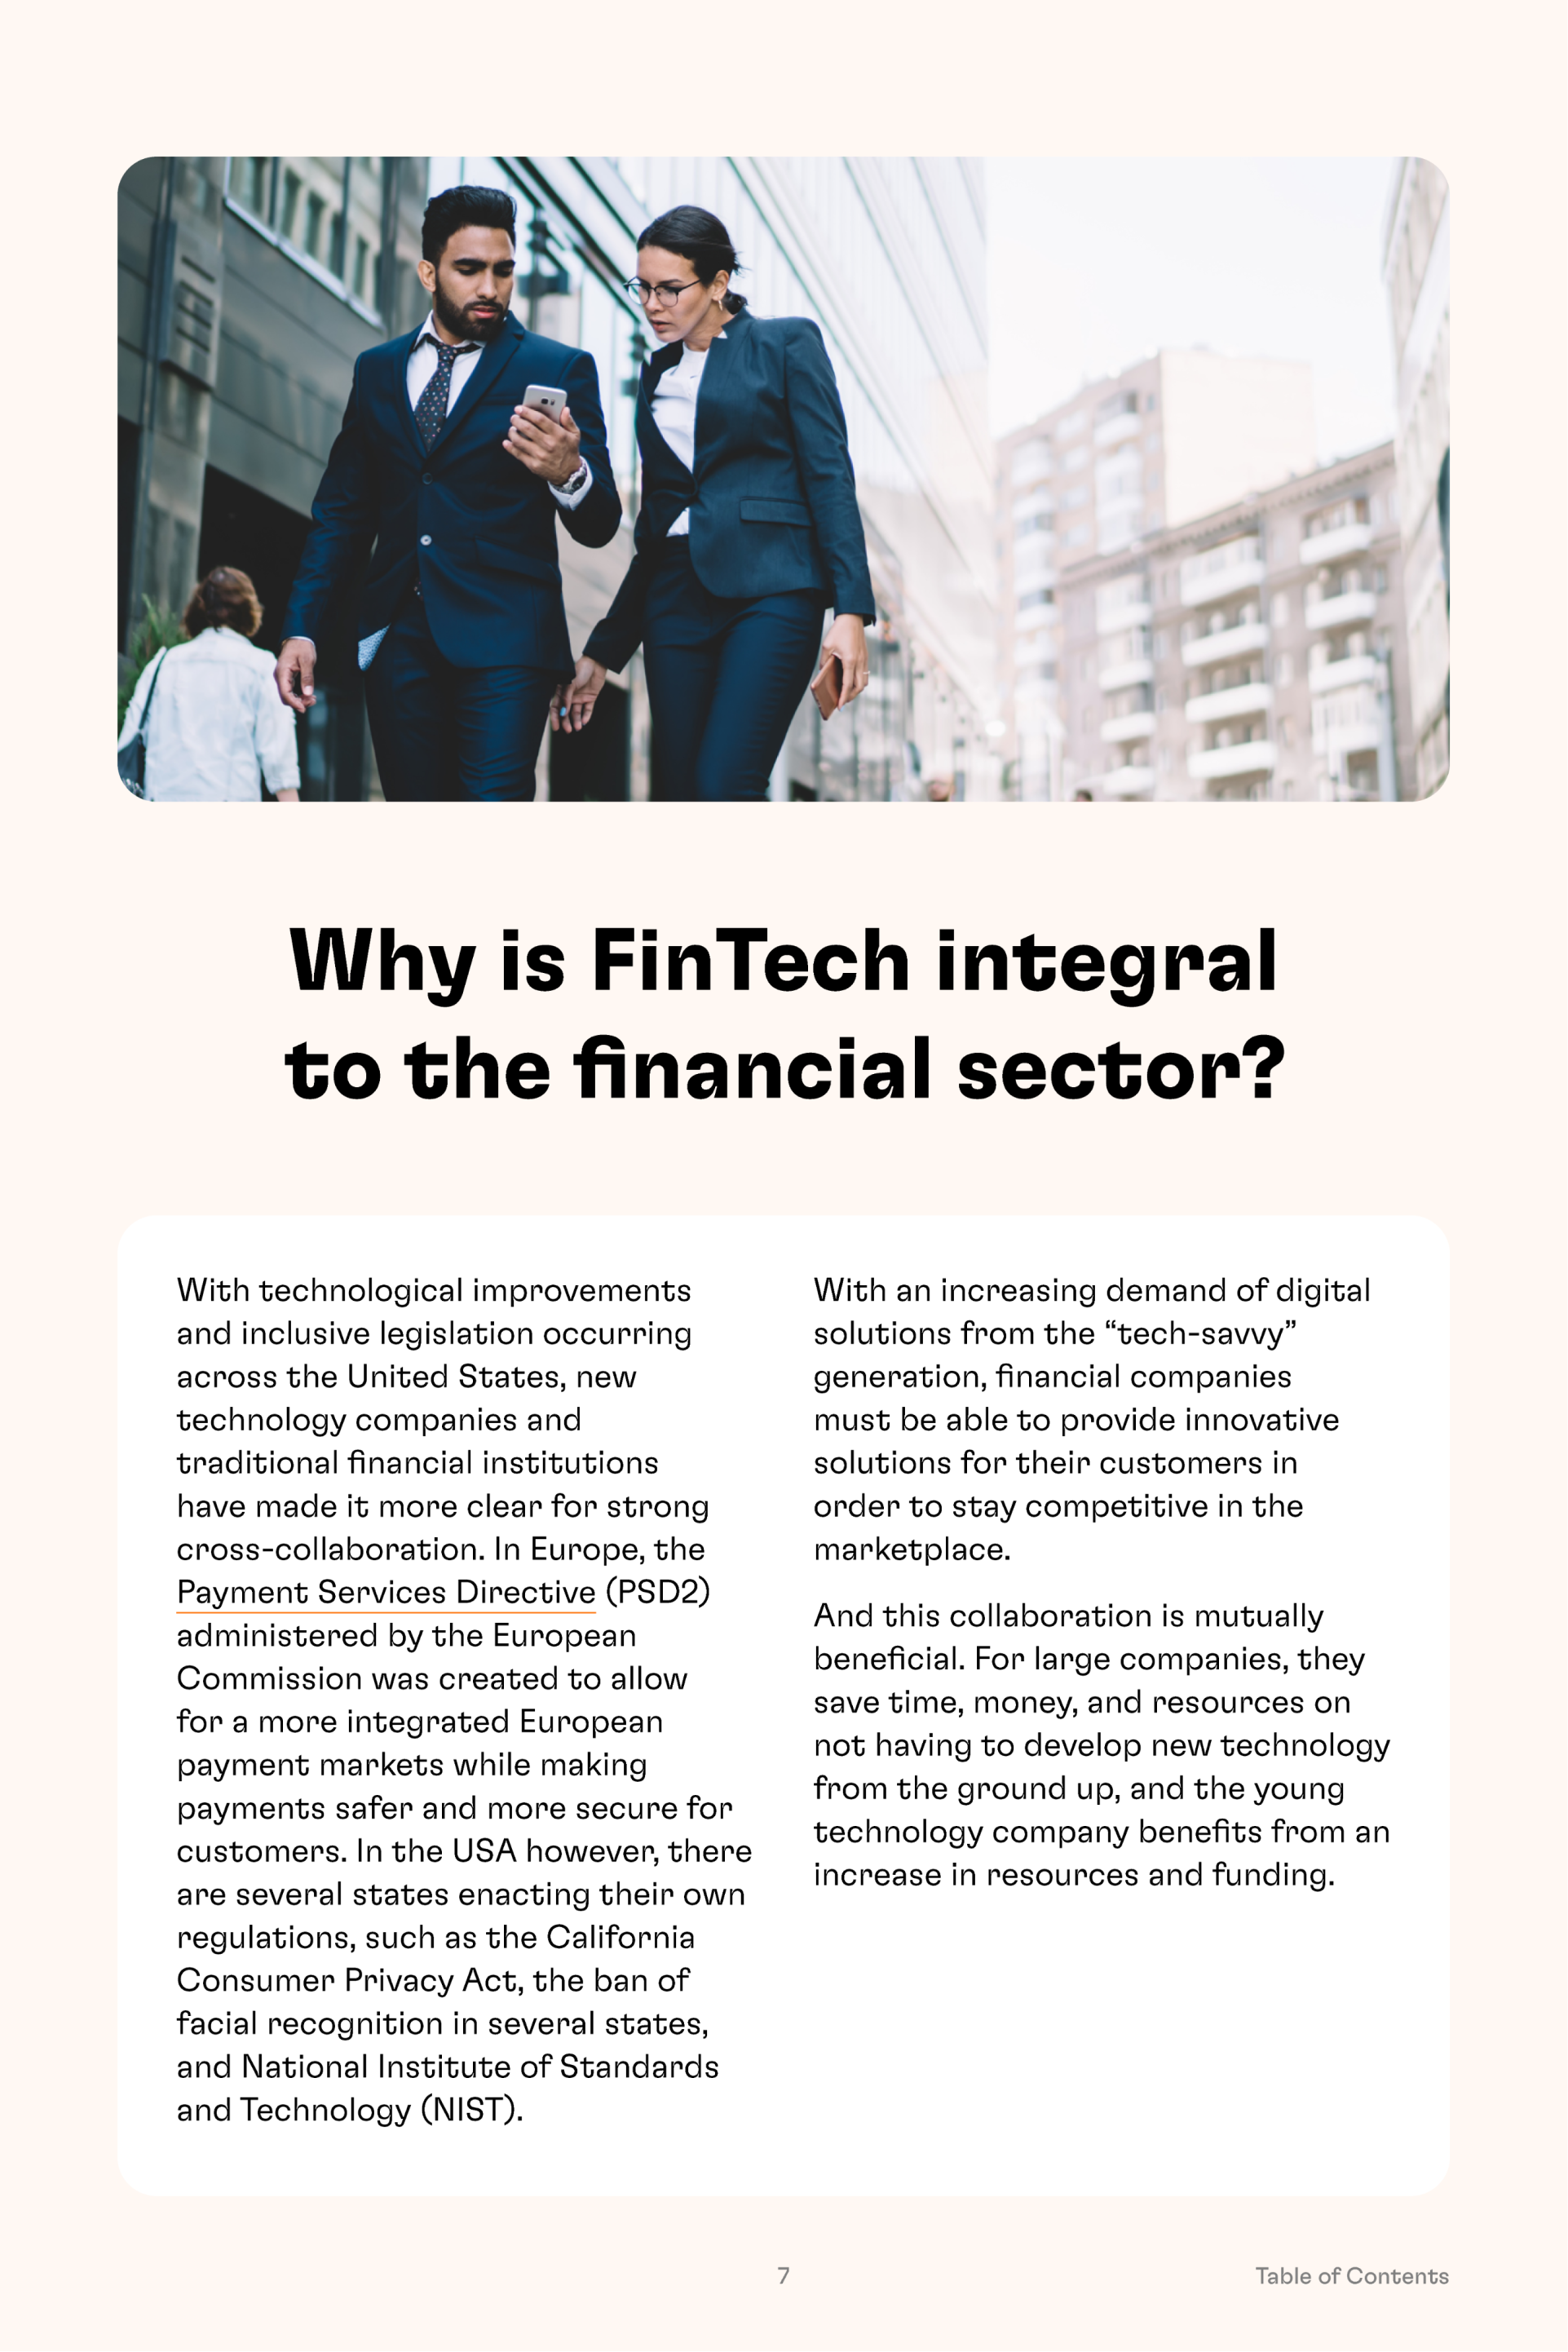 Why is FinTech integral to the financial sector